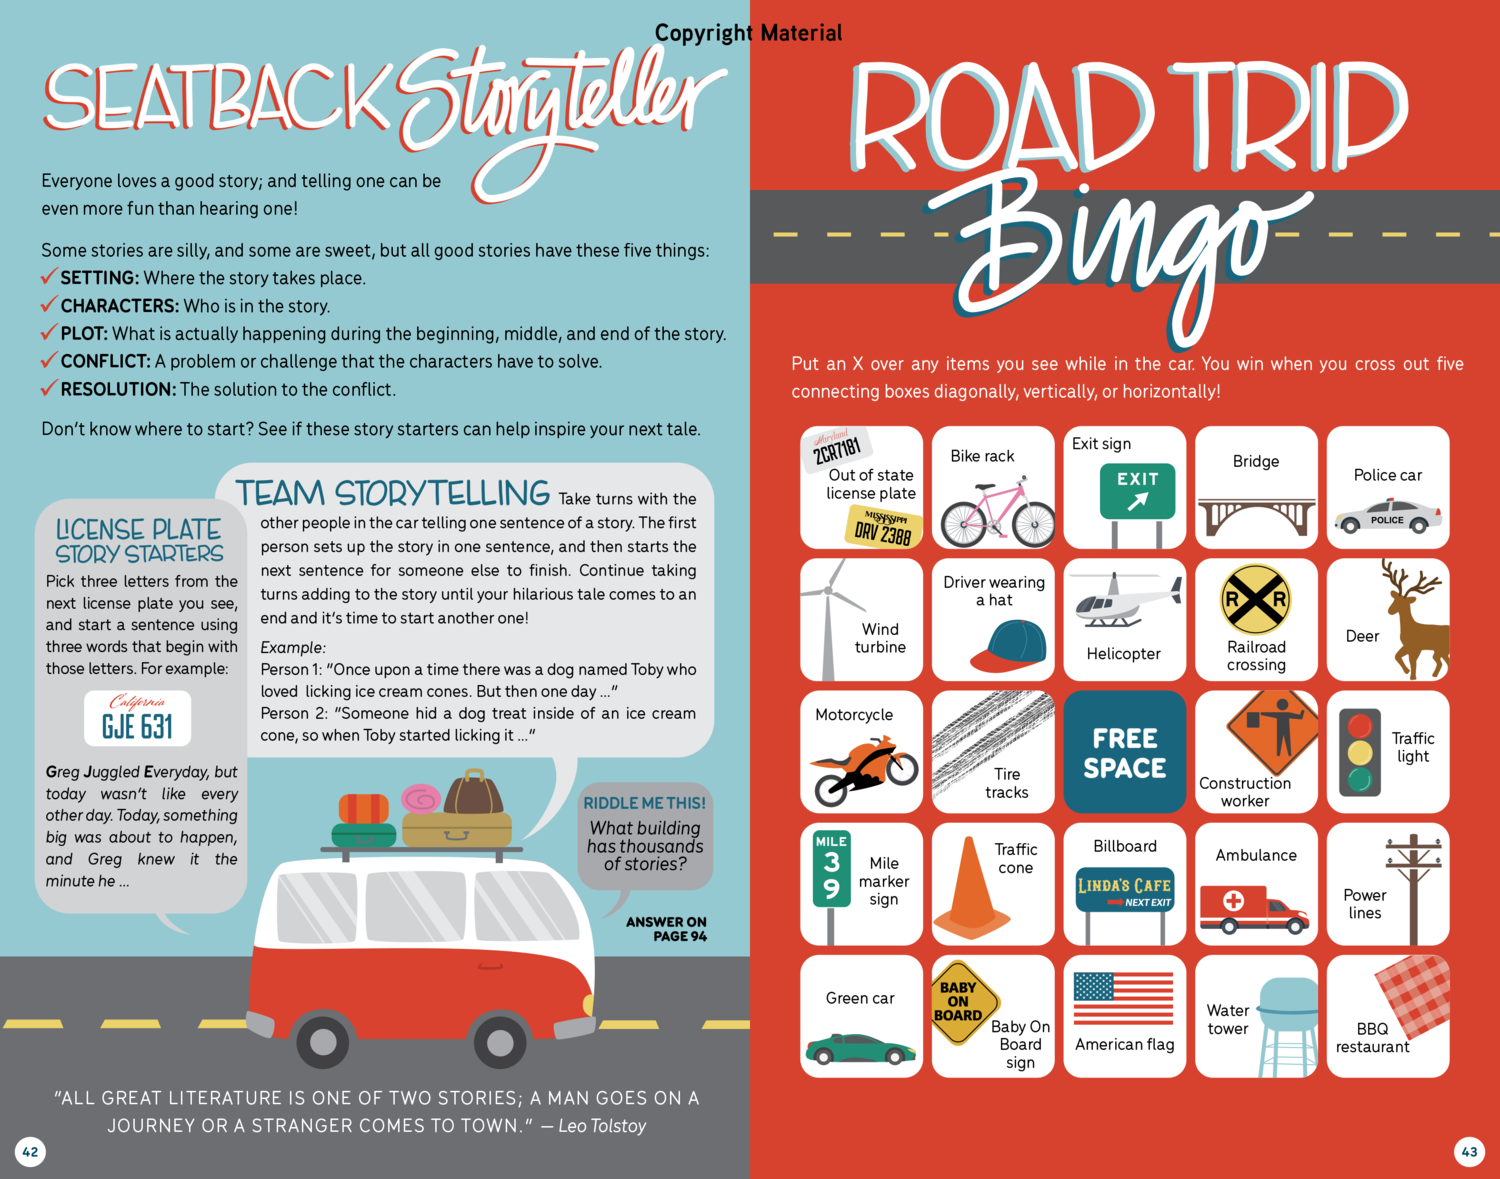 Road Trip Activities and Travel Journal for Kids — Designs by Tamiko